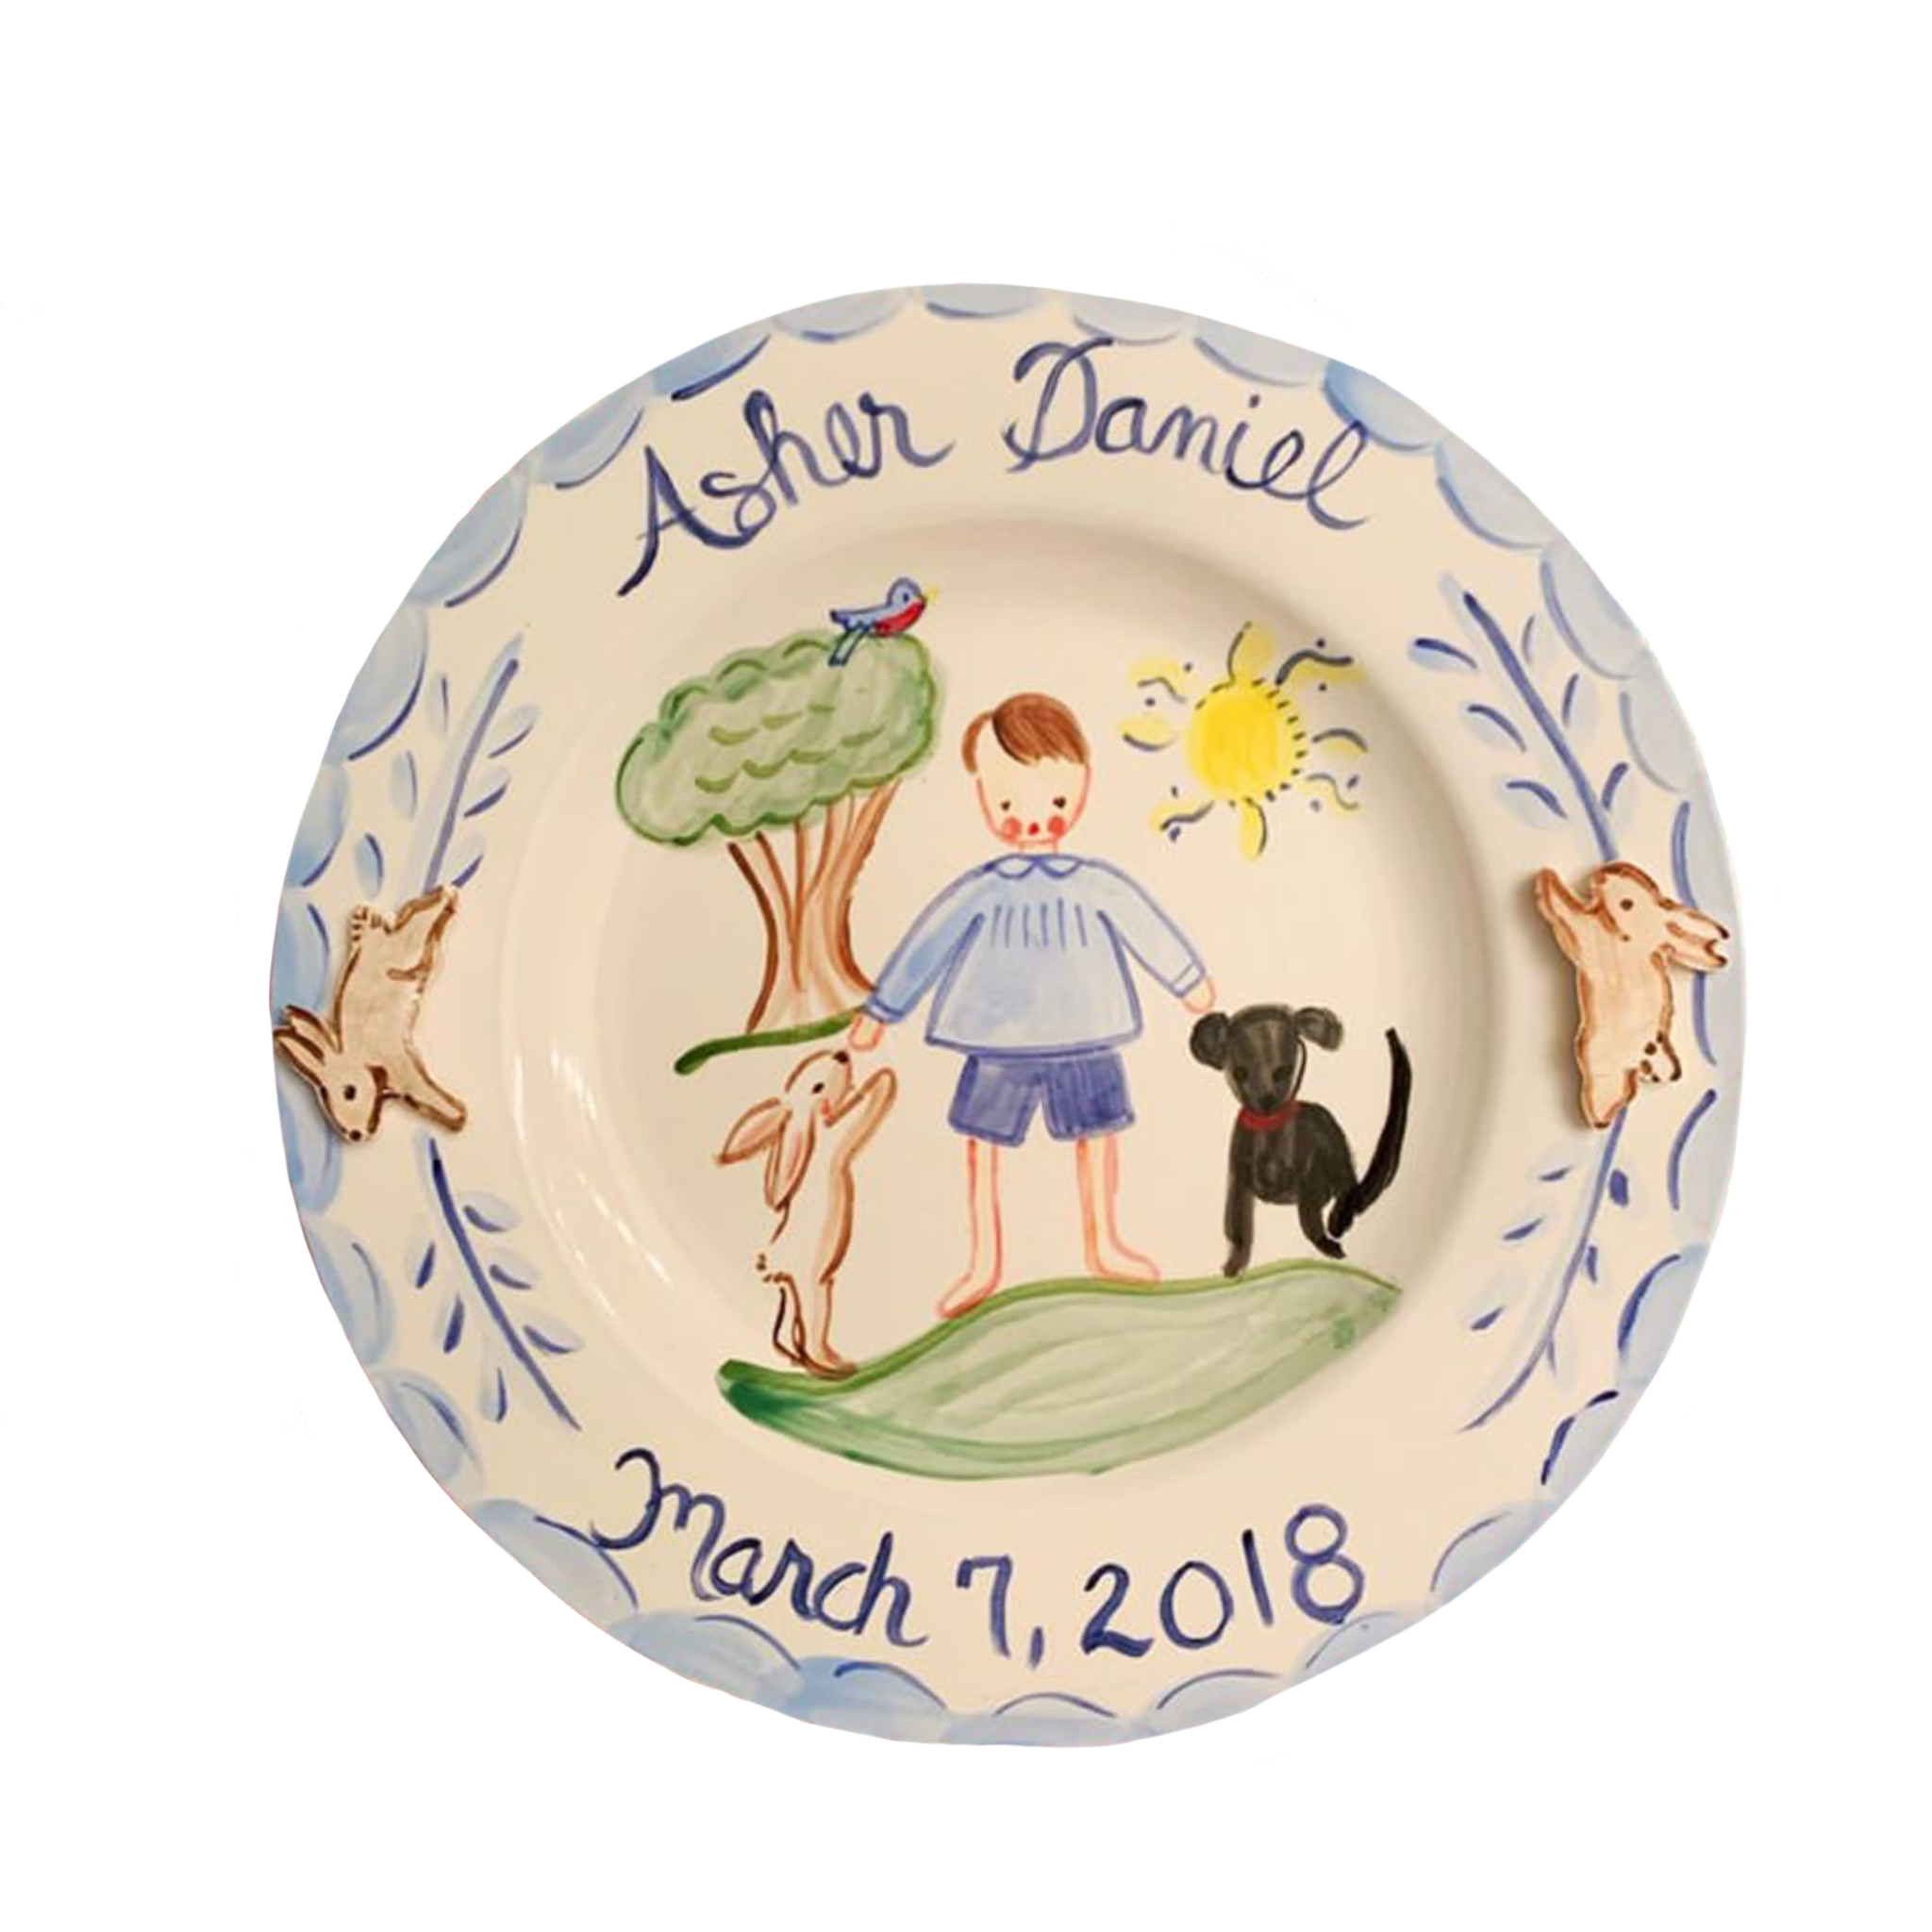 Personalized Plate - Boy with Bunny and Dog - Tricia Lowenfield Design